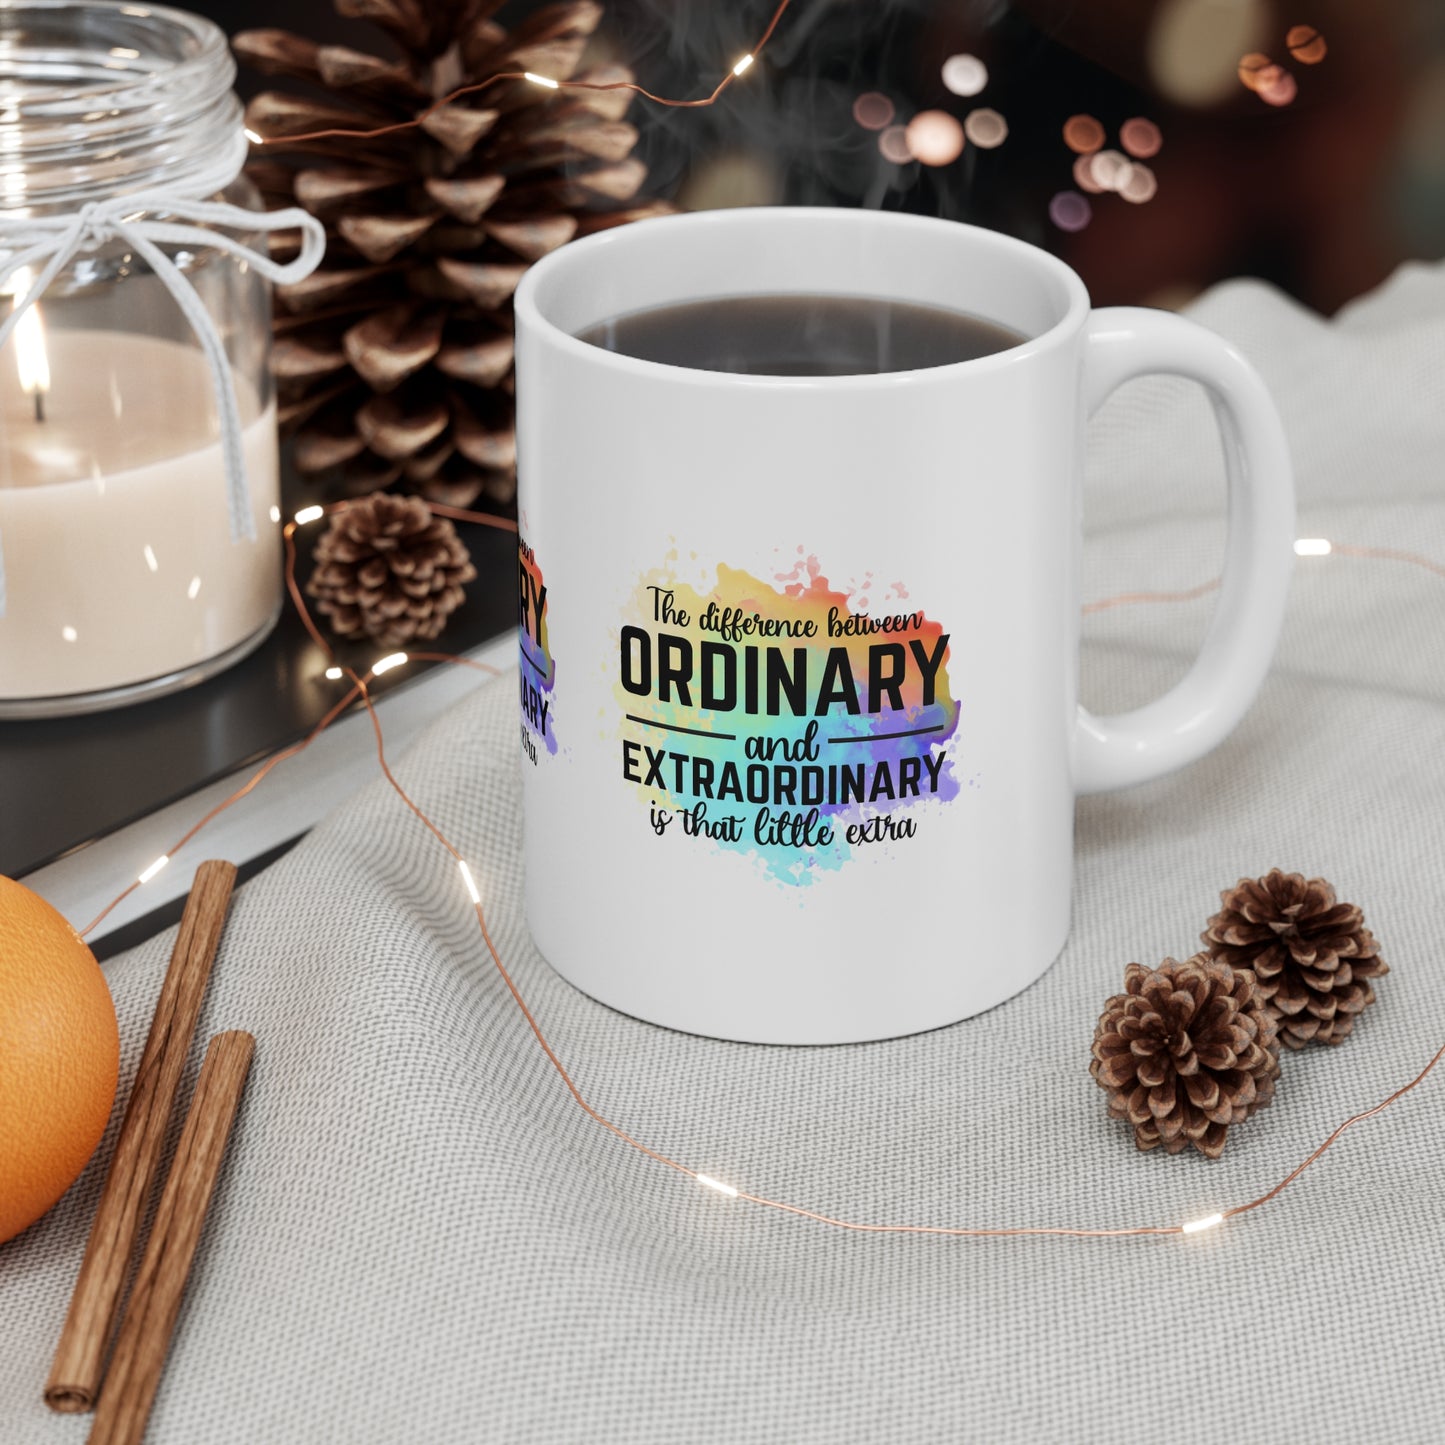 "The Difference Between Ordinary and Extraordinary is That Little Extra" INSPIRATIONAL MUG - MUGSCITY - Free Shipping